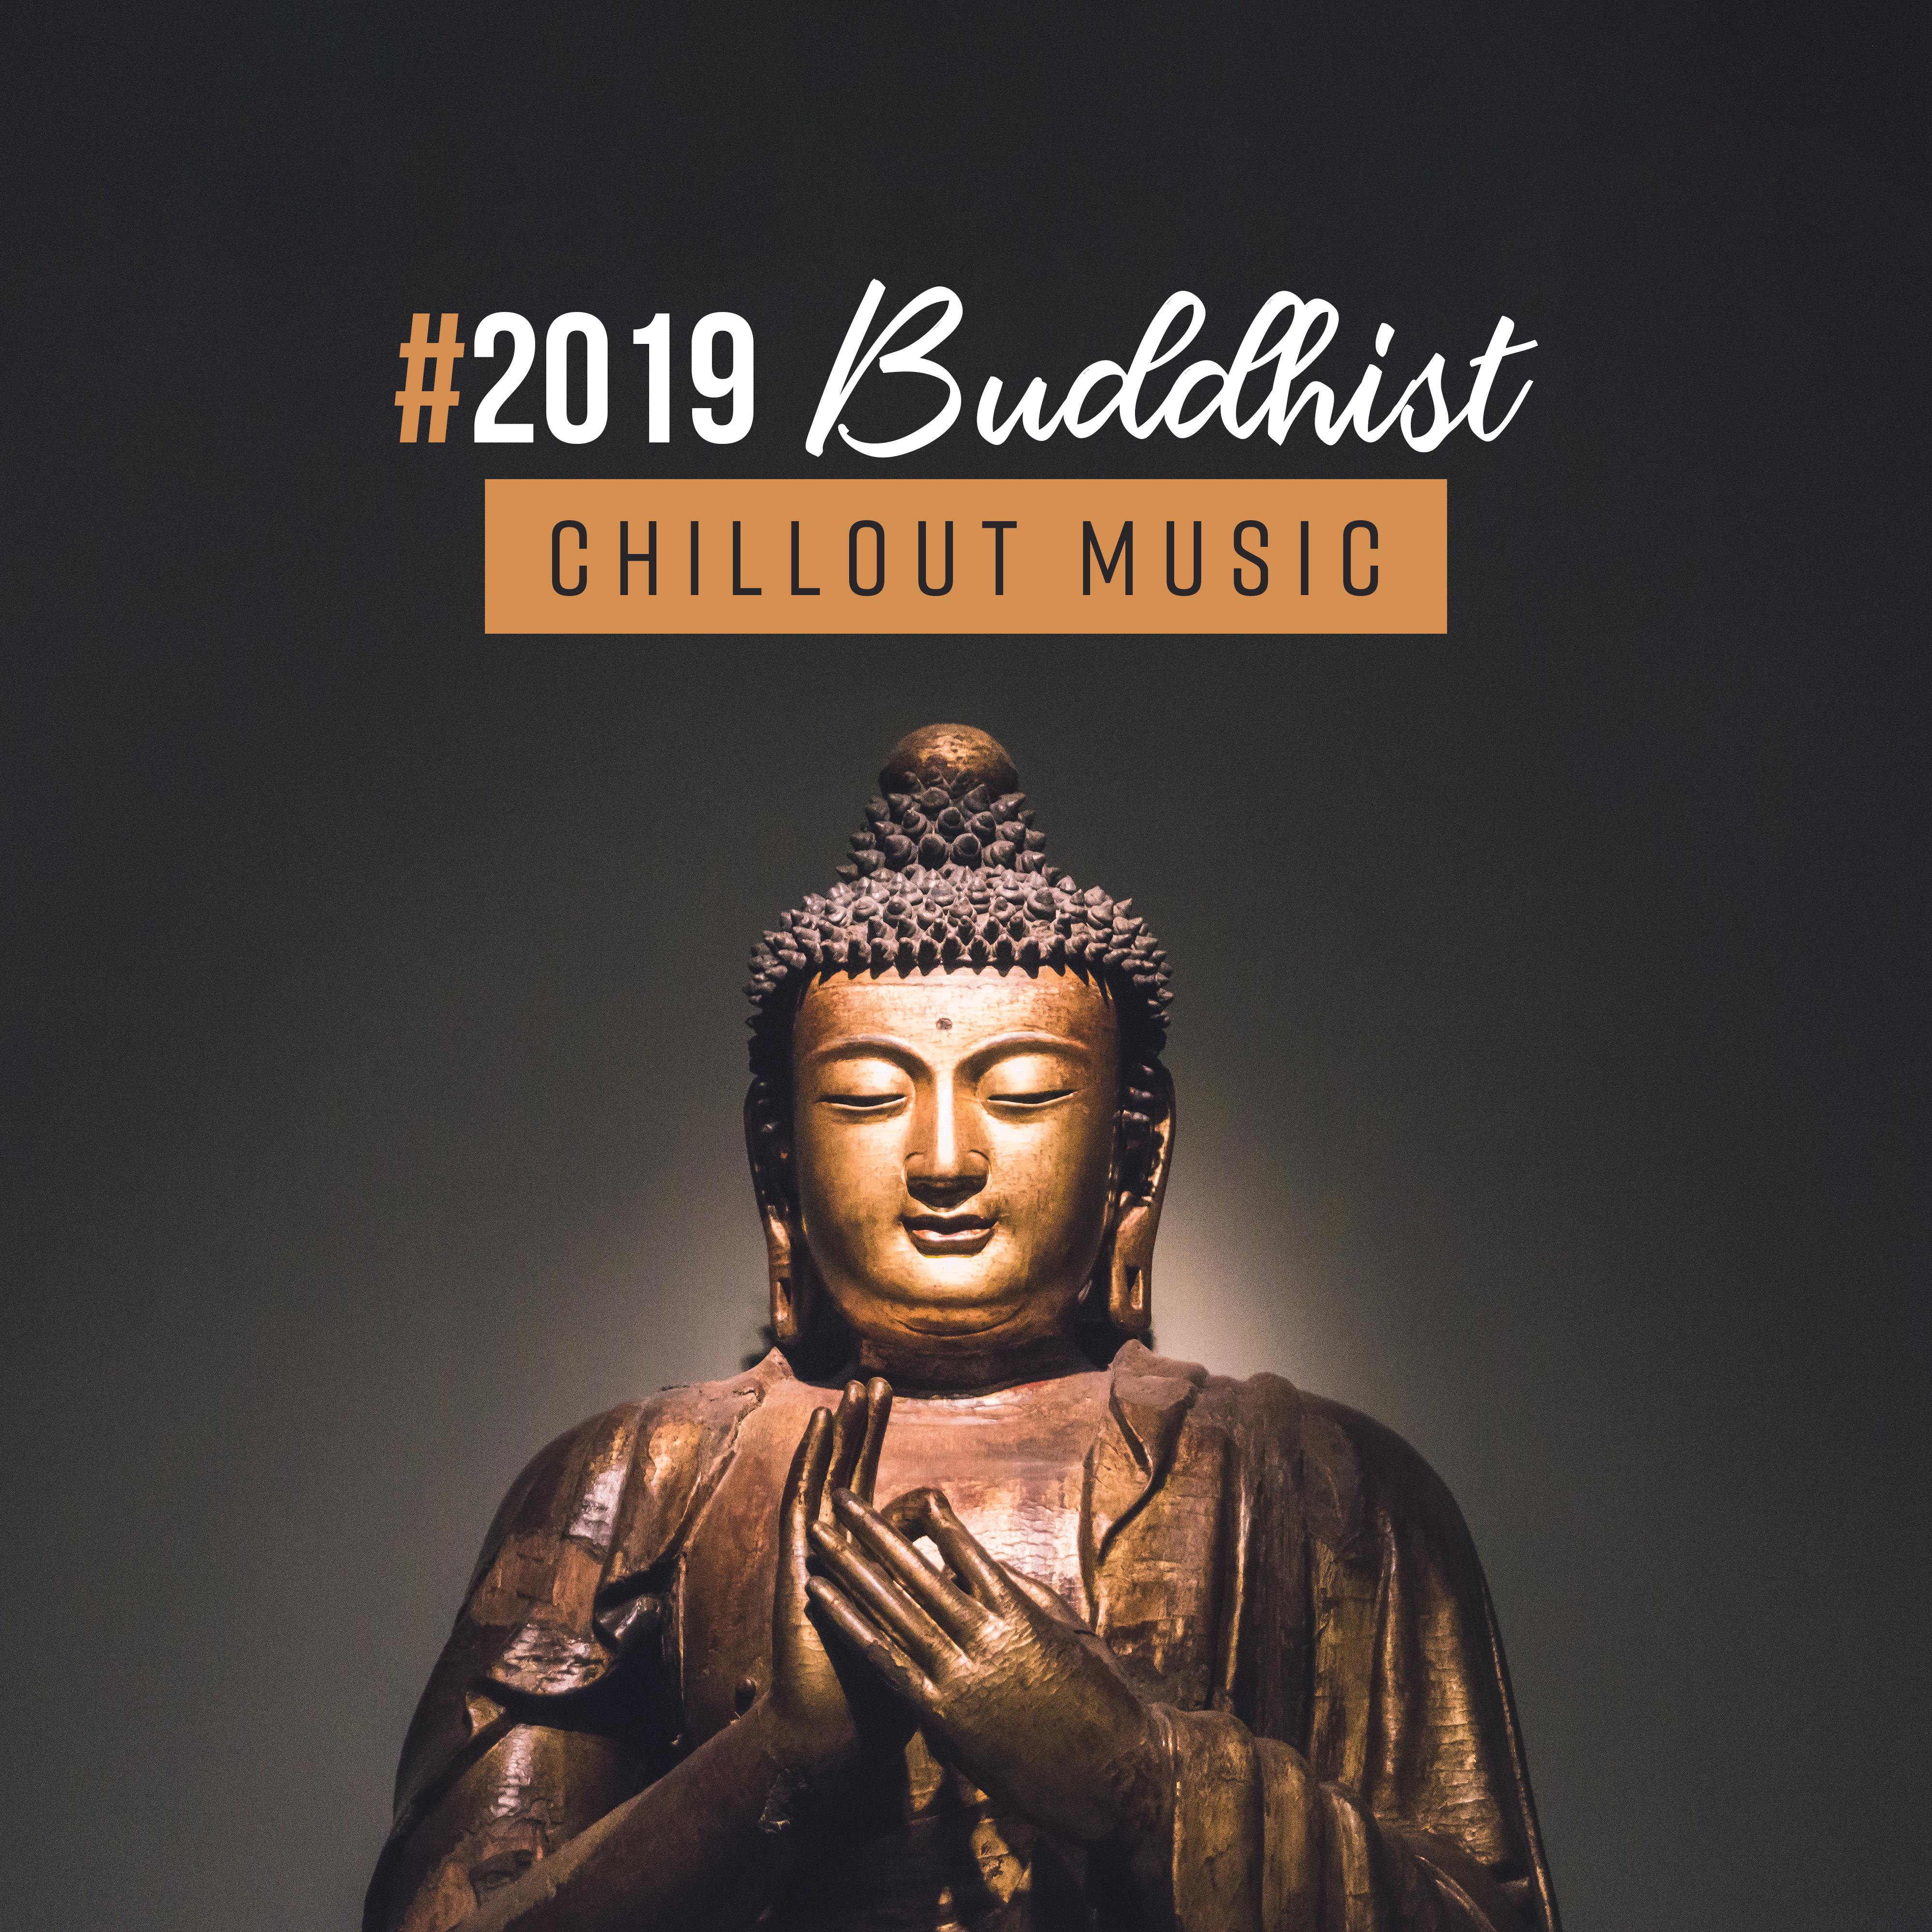 #2019 Buddhist Chillout Music: 15 Tracks Created for Relaxation, Yoga Exercises, Contemplation and Meditation